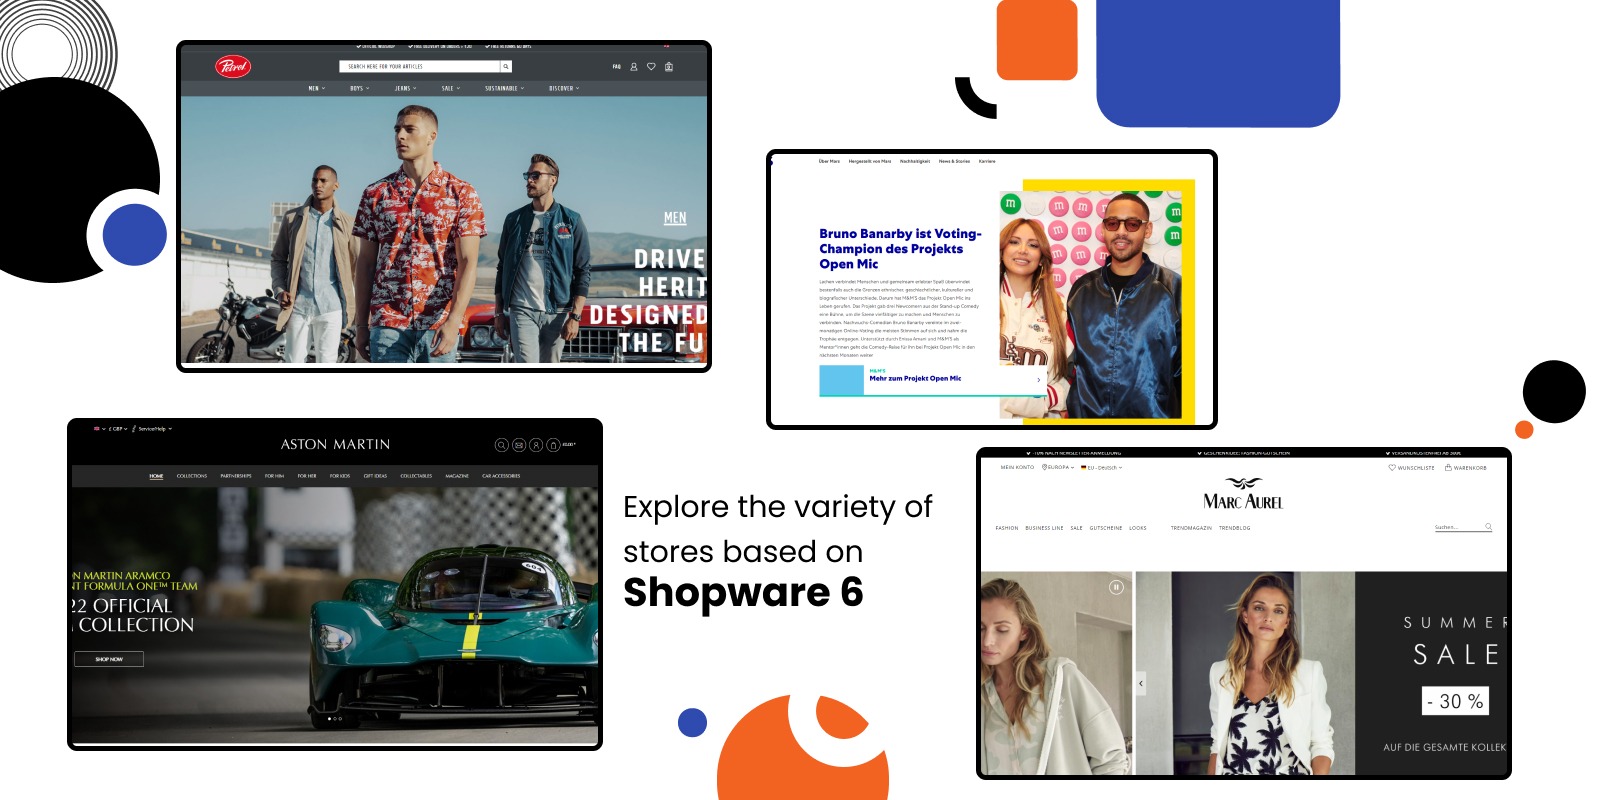 Explore the variety of stores based on Shopware 6